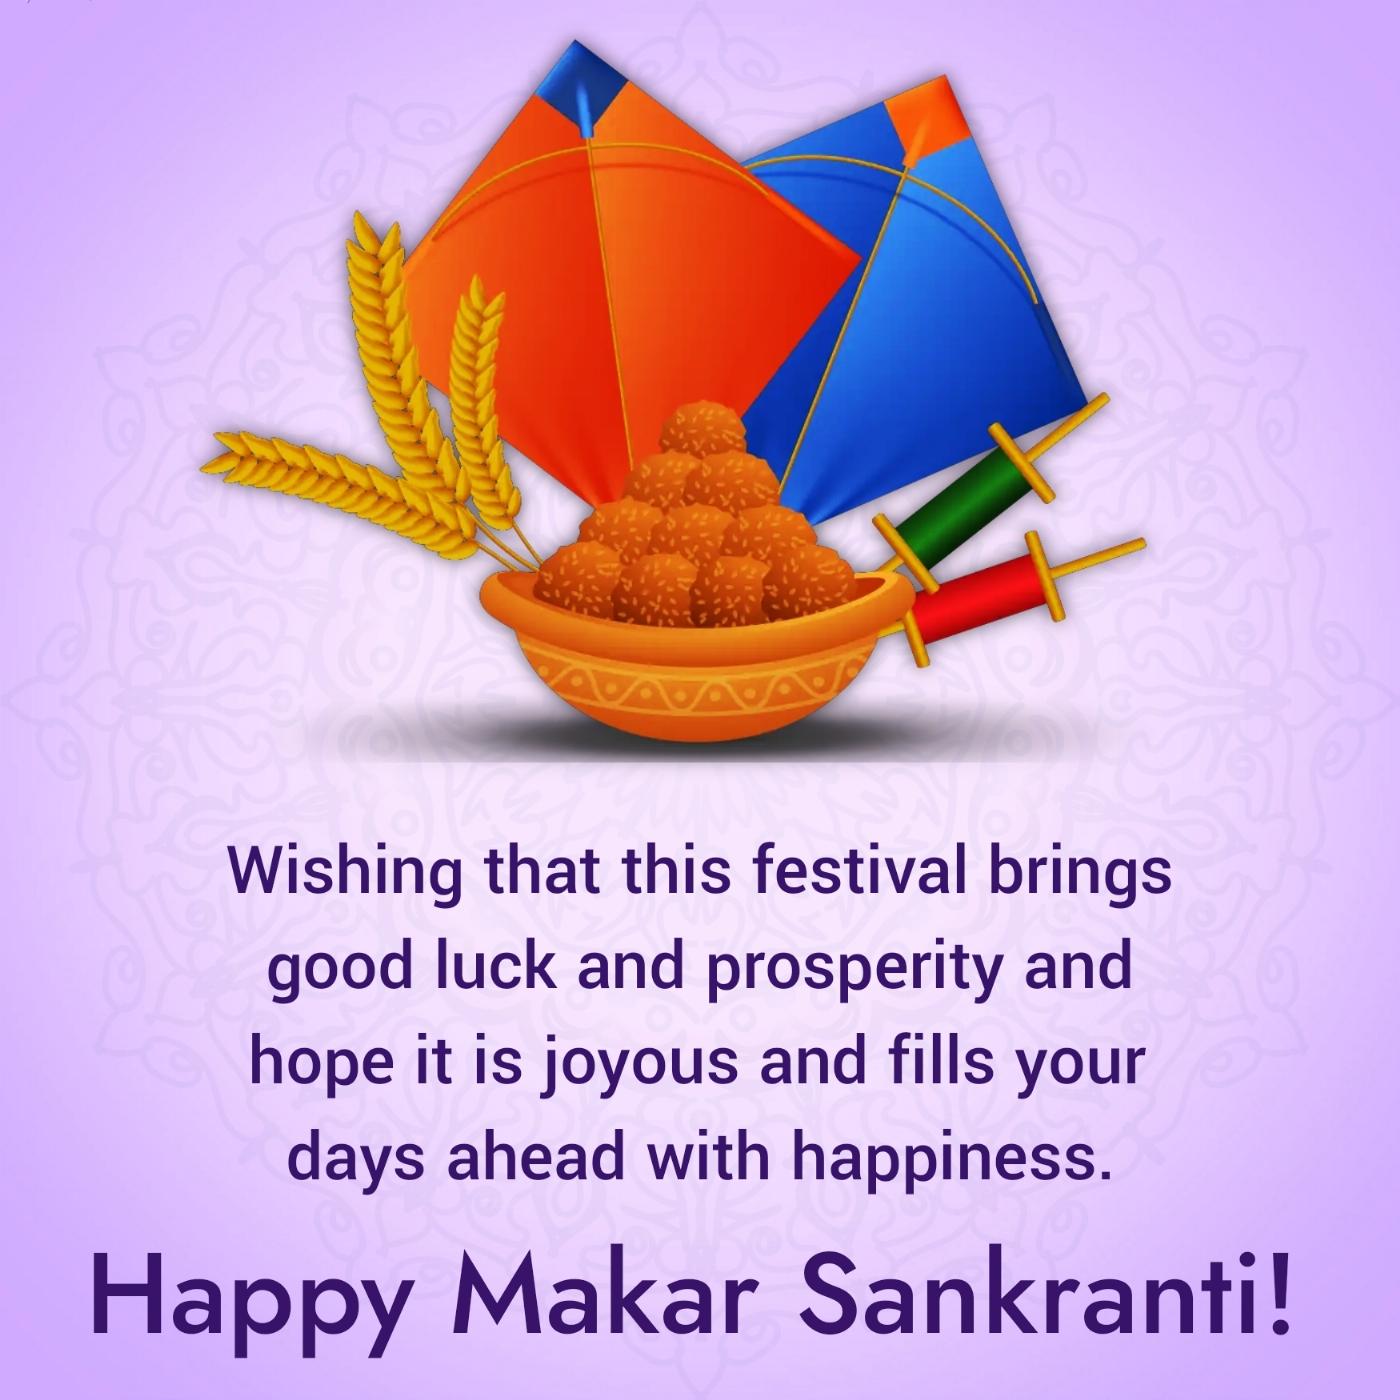 Wishing that this festival brings good luck and prosperity